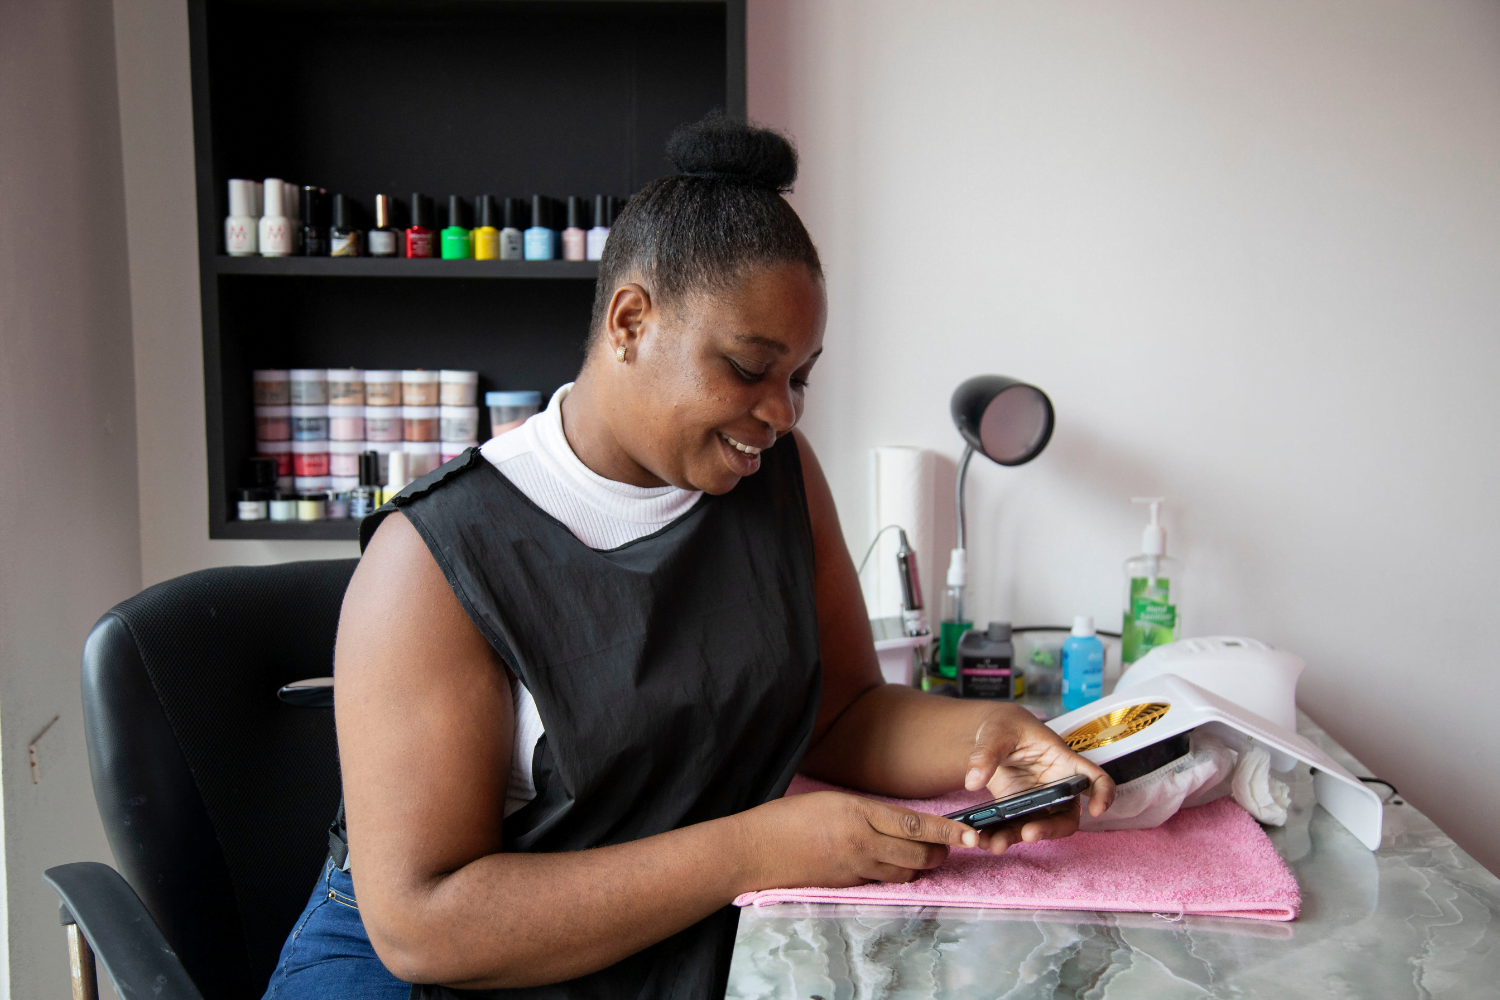 Akela Henry, a woman entrepreneur from Guyana, sits in a black smock with a white sleeveless shirt underneath in a beauty shop. She is using her smartphone. Her hair is in a bun and she is smiling.